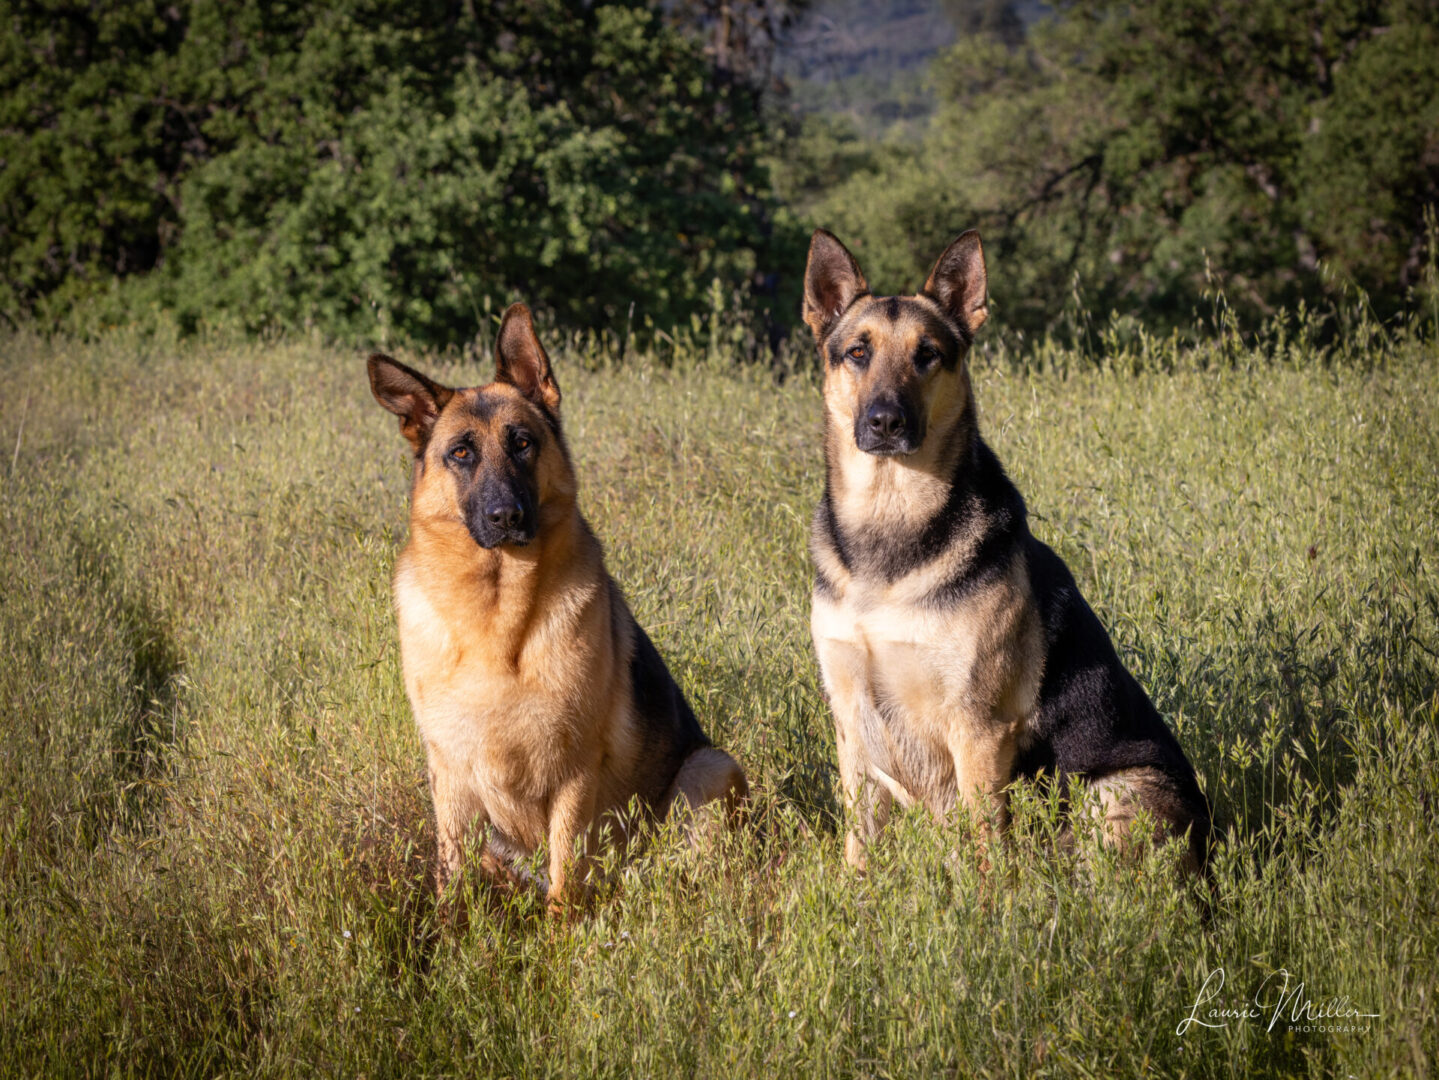 Two German Shepherds sitting in tall grass.